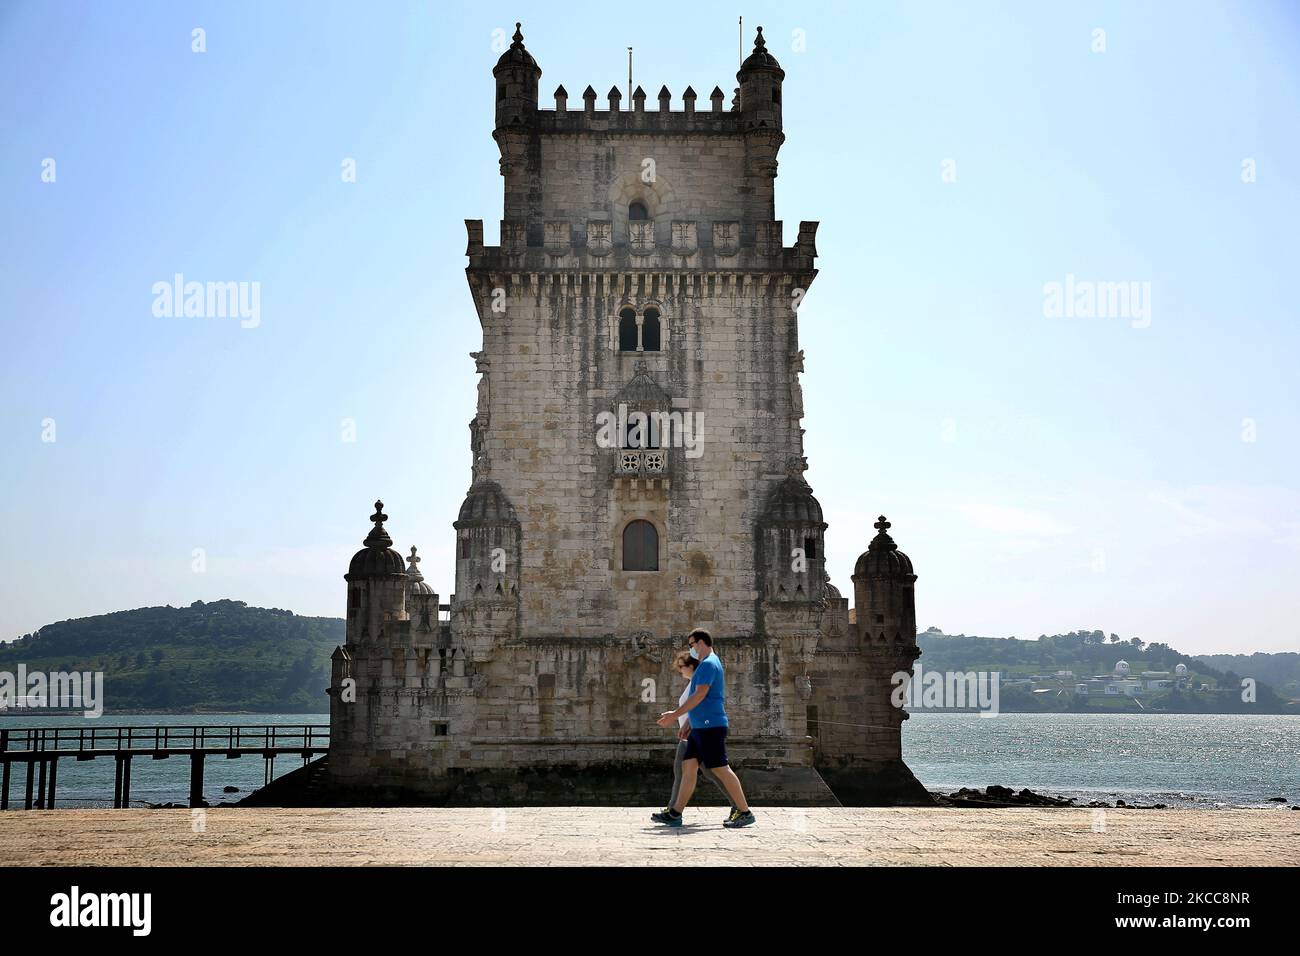 People wearing face masks walk past the Belem Tower in Lisbon, Portugal, on April 5, 2021. Portugal started on April 5, the second phase of lifting COVID-19 restrictions, with the reopening of cafes and restaurants terraces, museums, monuments, gyms, shops up to 200 square meters, and the return to classes of students from the 5th to the 9th grade, nearly two months after tightening Covid-19 curbs following a wave of cases early this year. (Photo by Pedro FiÃºza/NurPhoto) Stock Photo